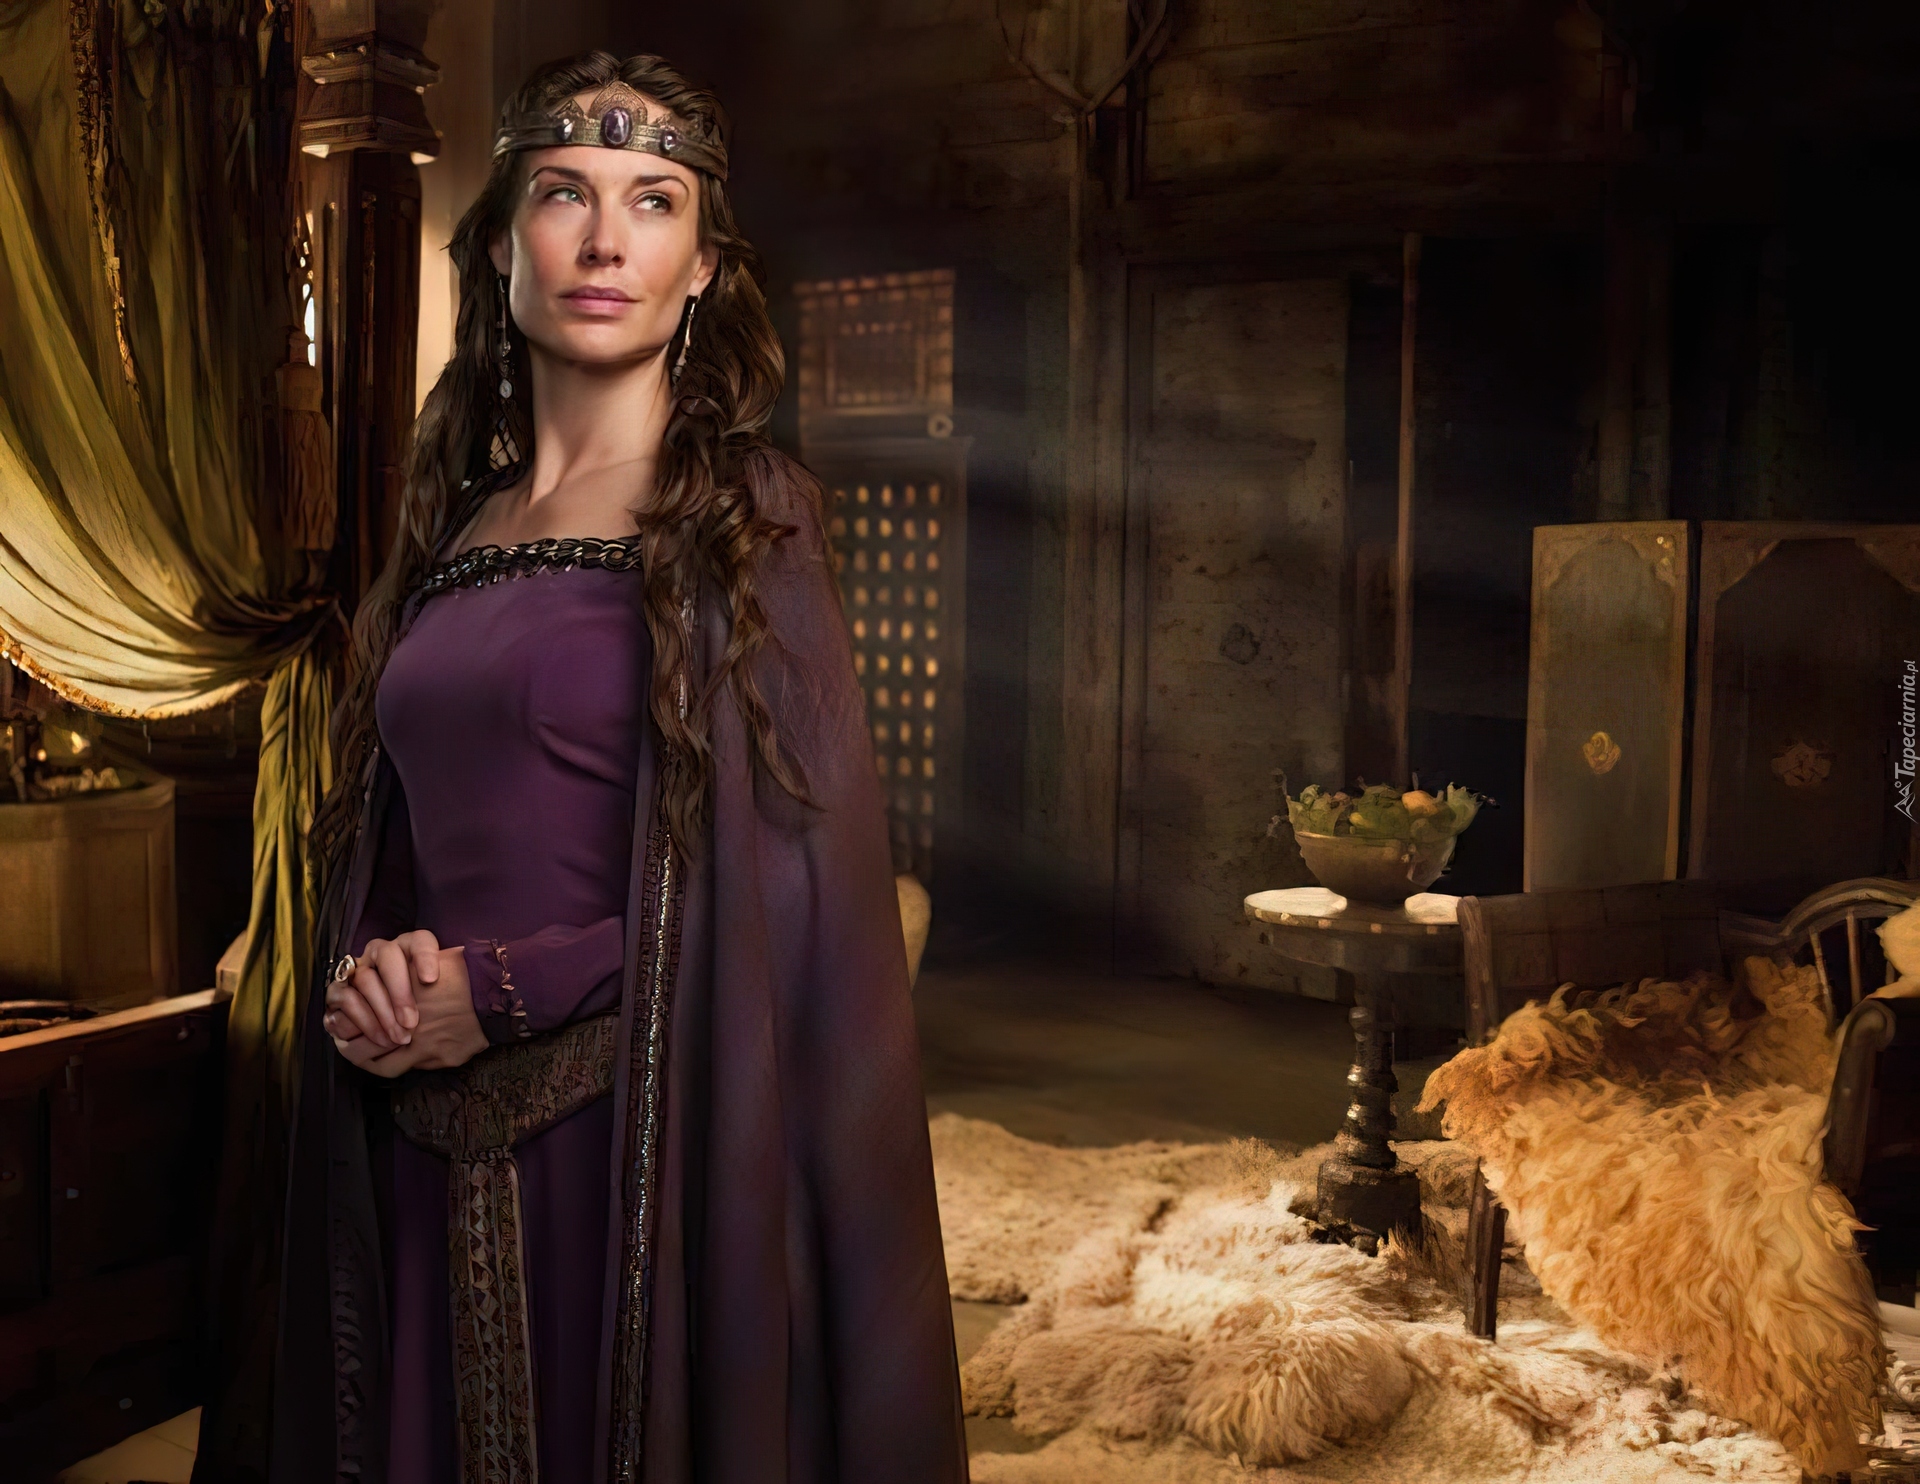 Serial, Camelot, Claire Forlani